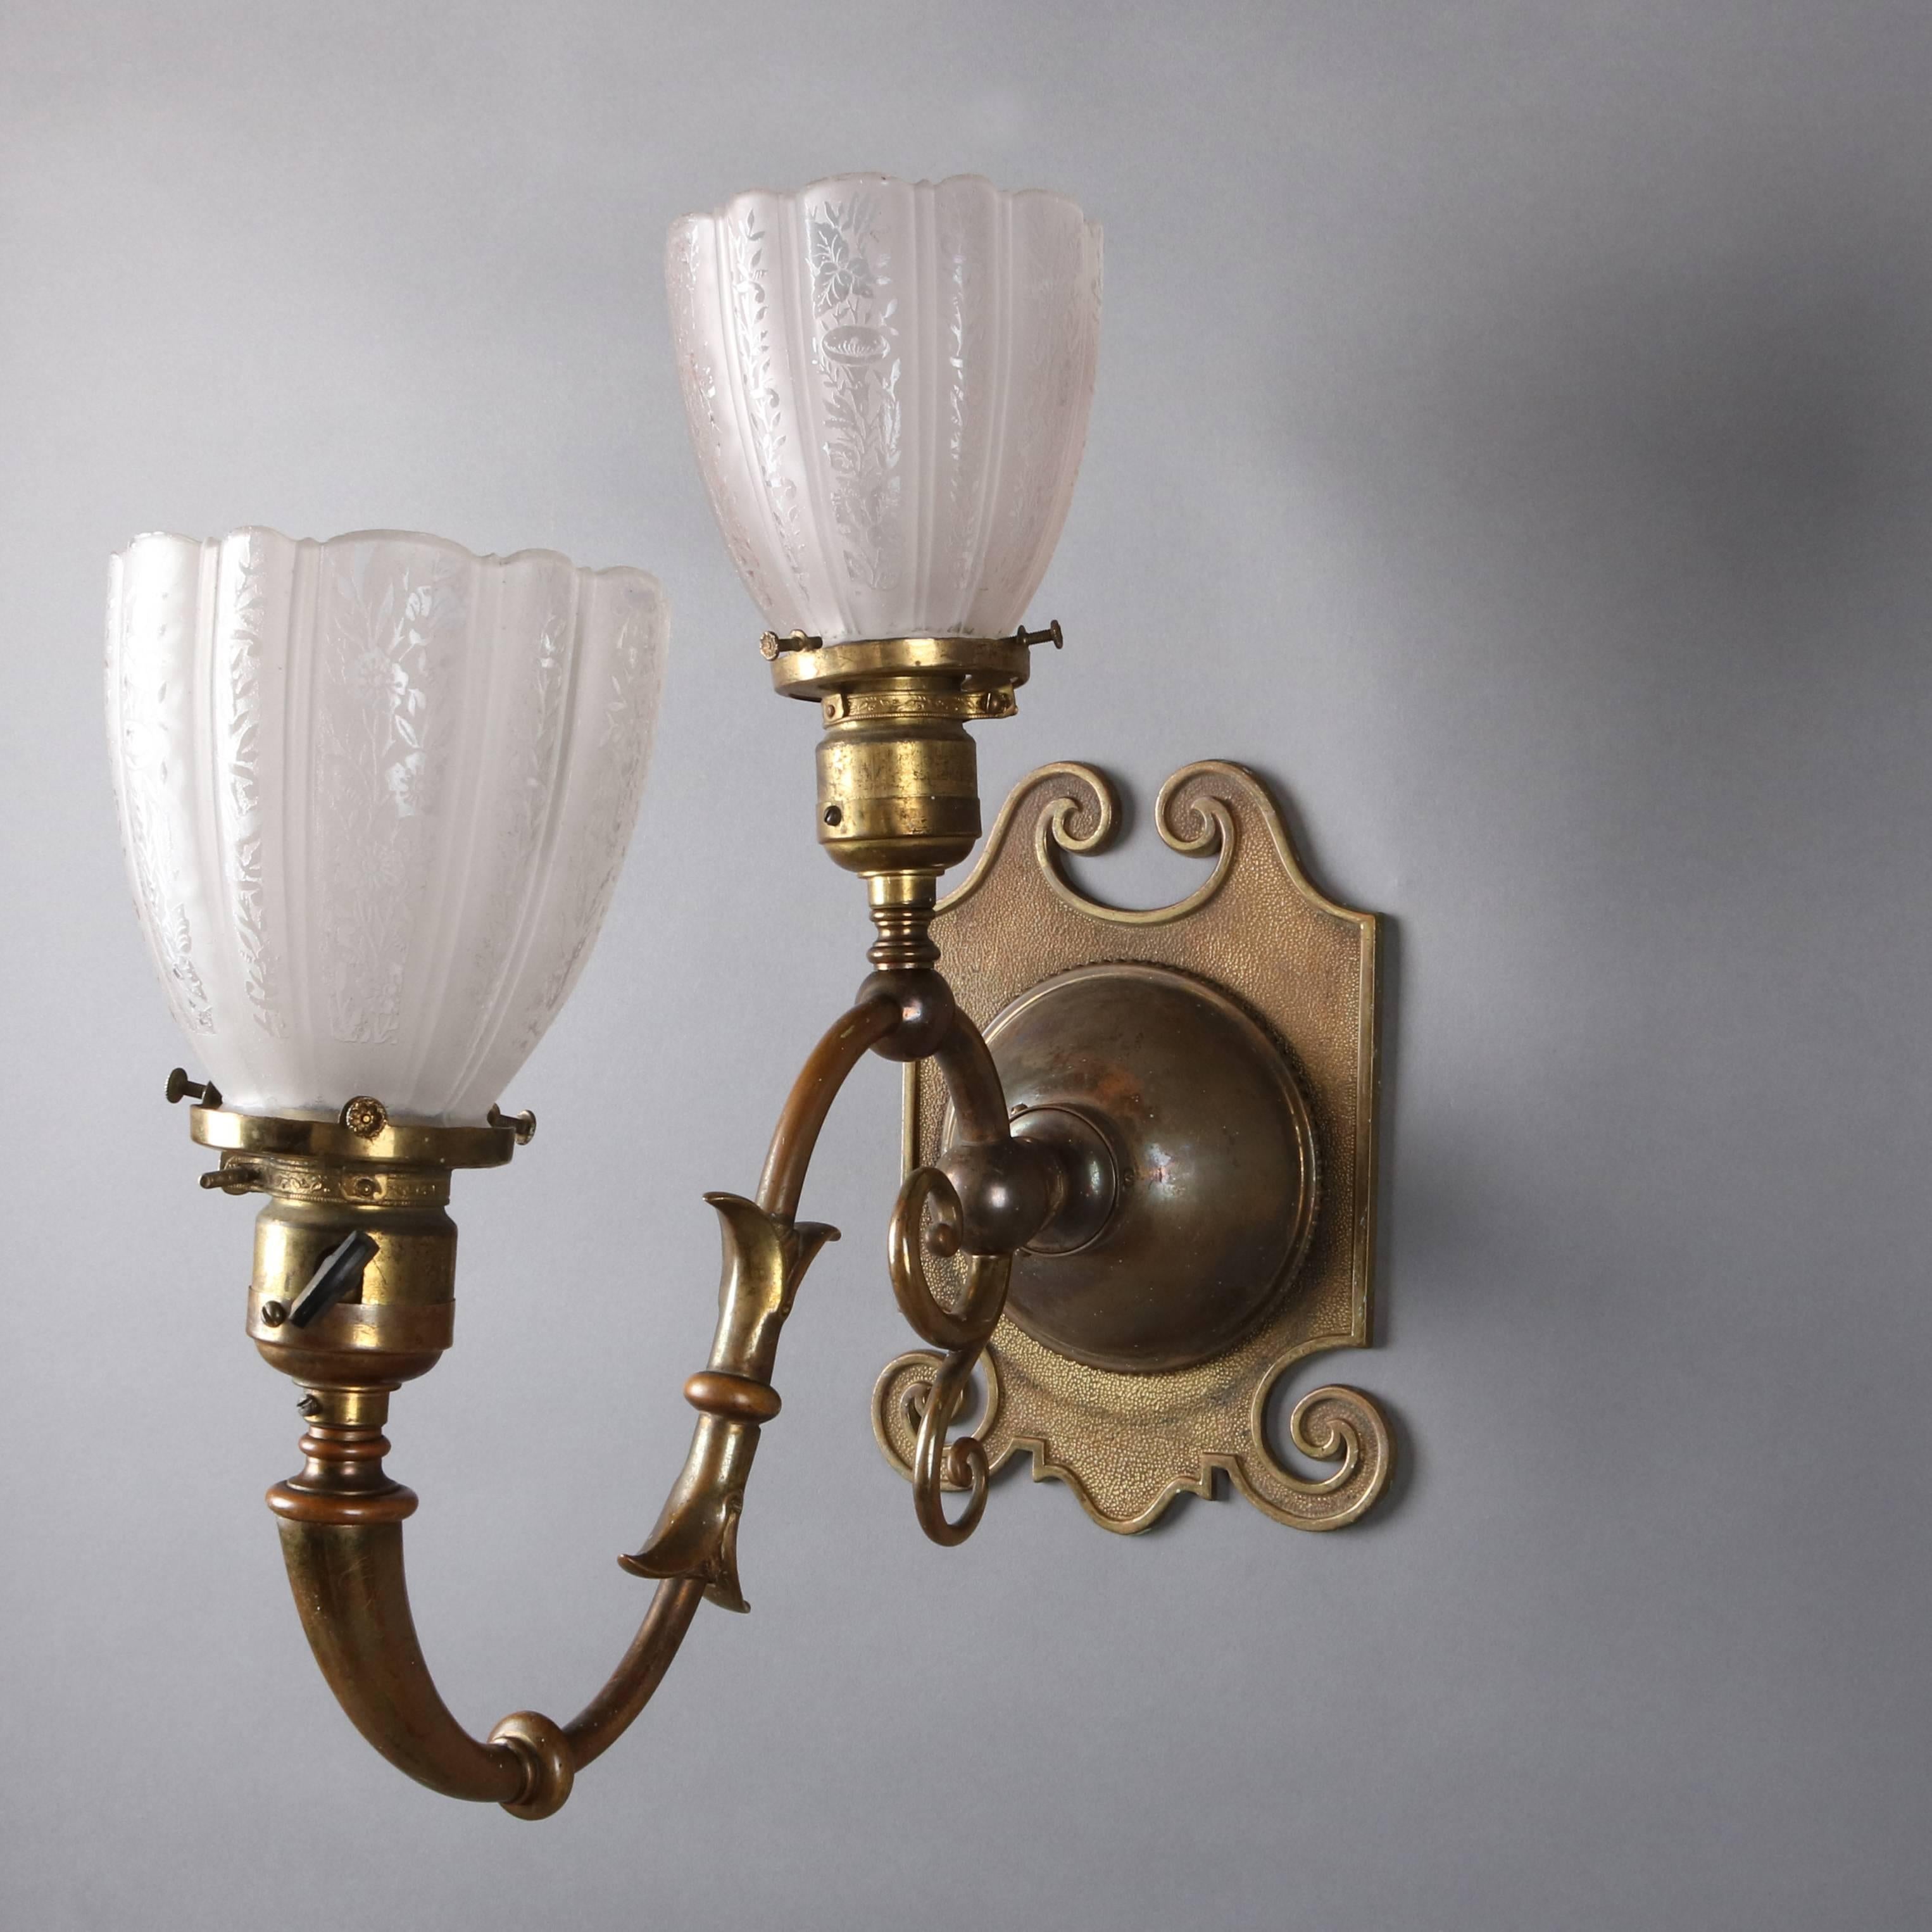 Set of four antique Arts & Crafts early electric wall sconces feature scroll and foliate form arms terminating in two lights each with floral and foliate etched shades, converted from gas to electric, newly re-wired.

Measures: 13" H @ h